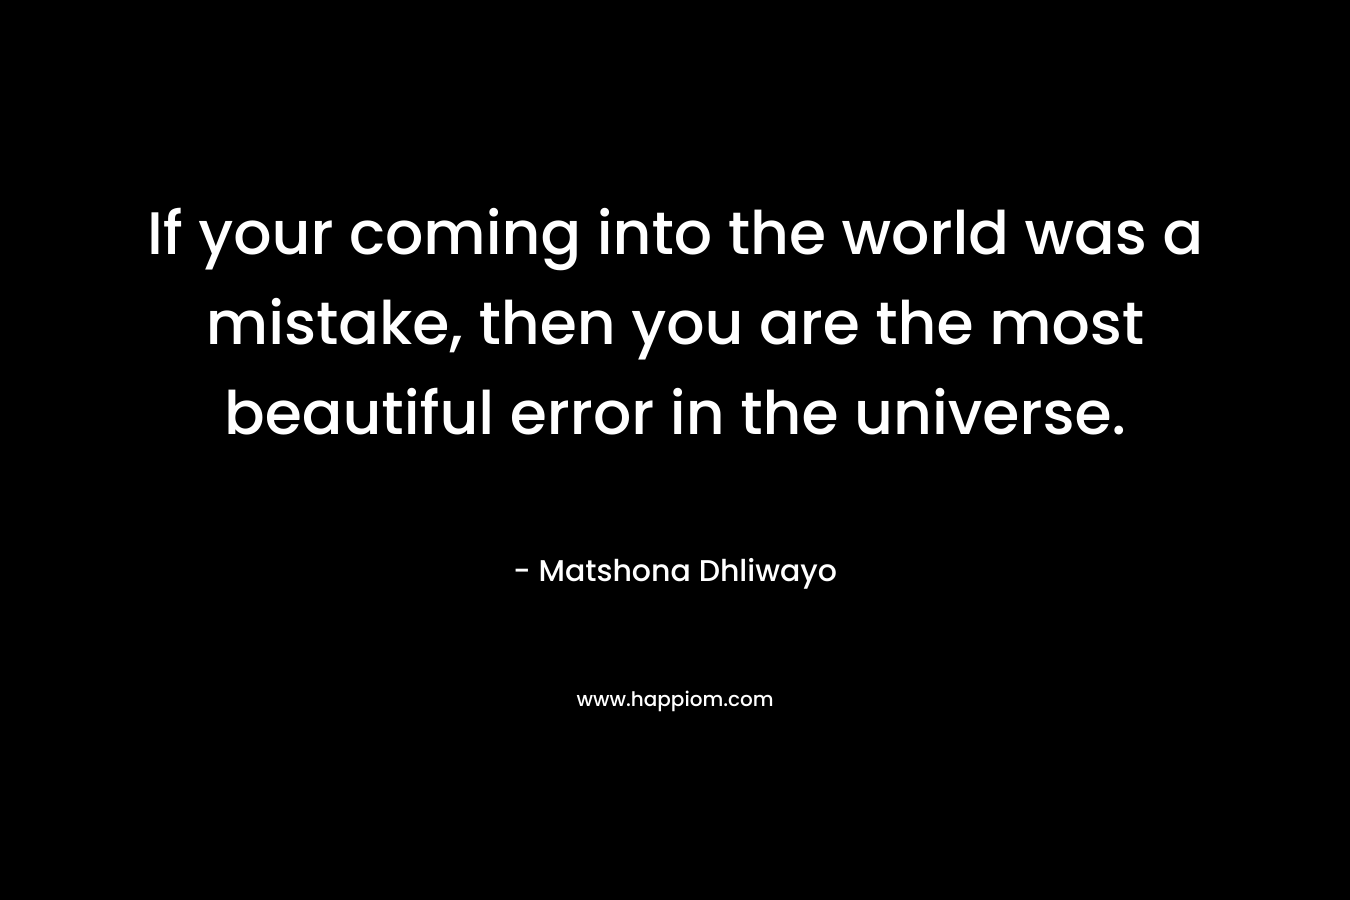 If your coming into the world was a mistake, then you are the most beautiful error in the universe.